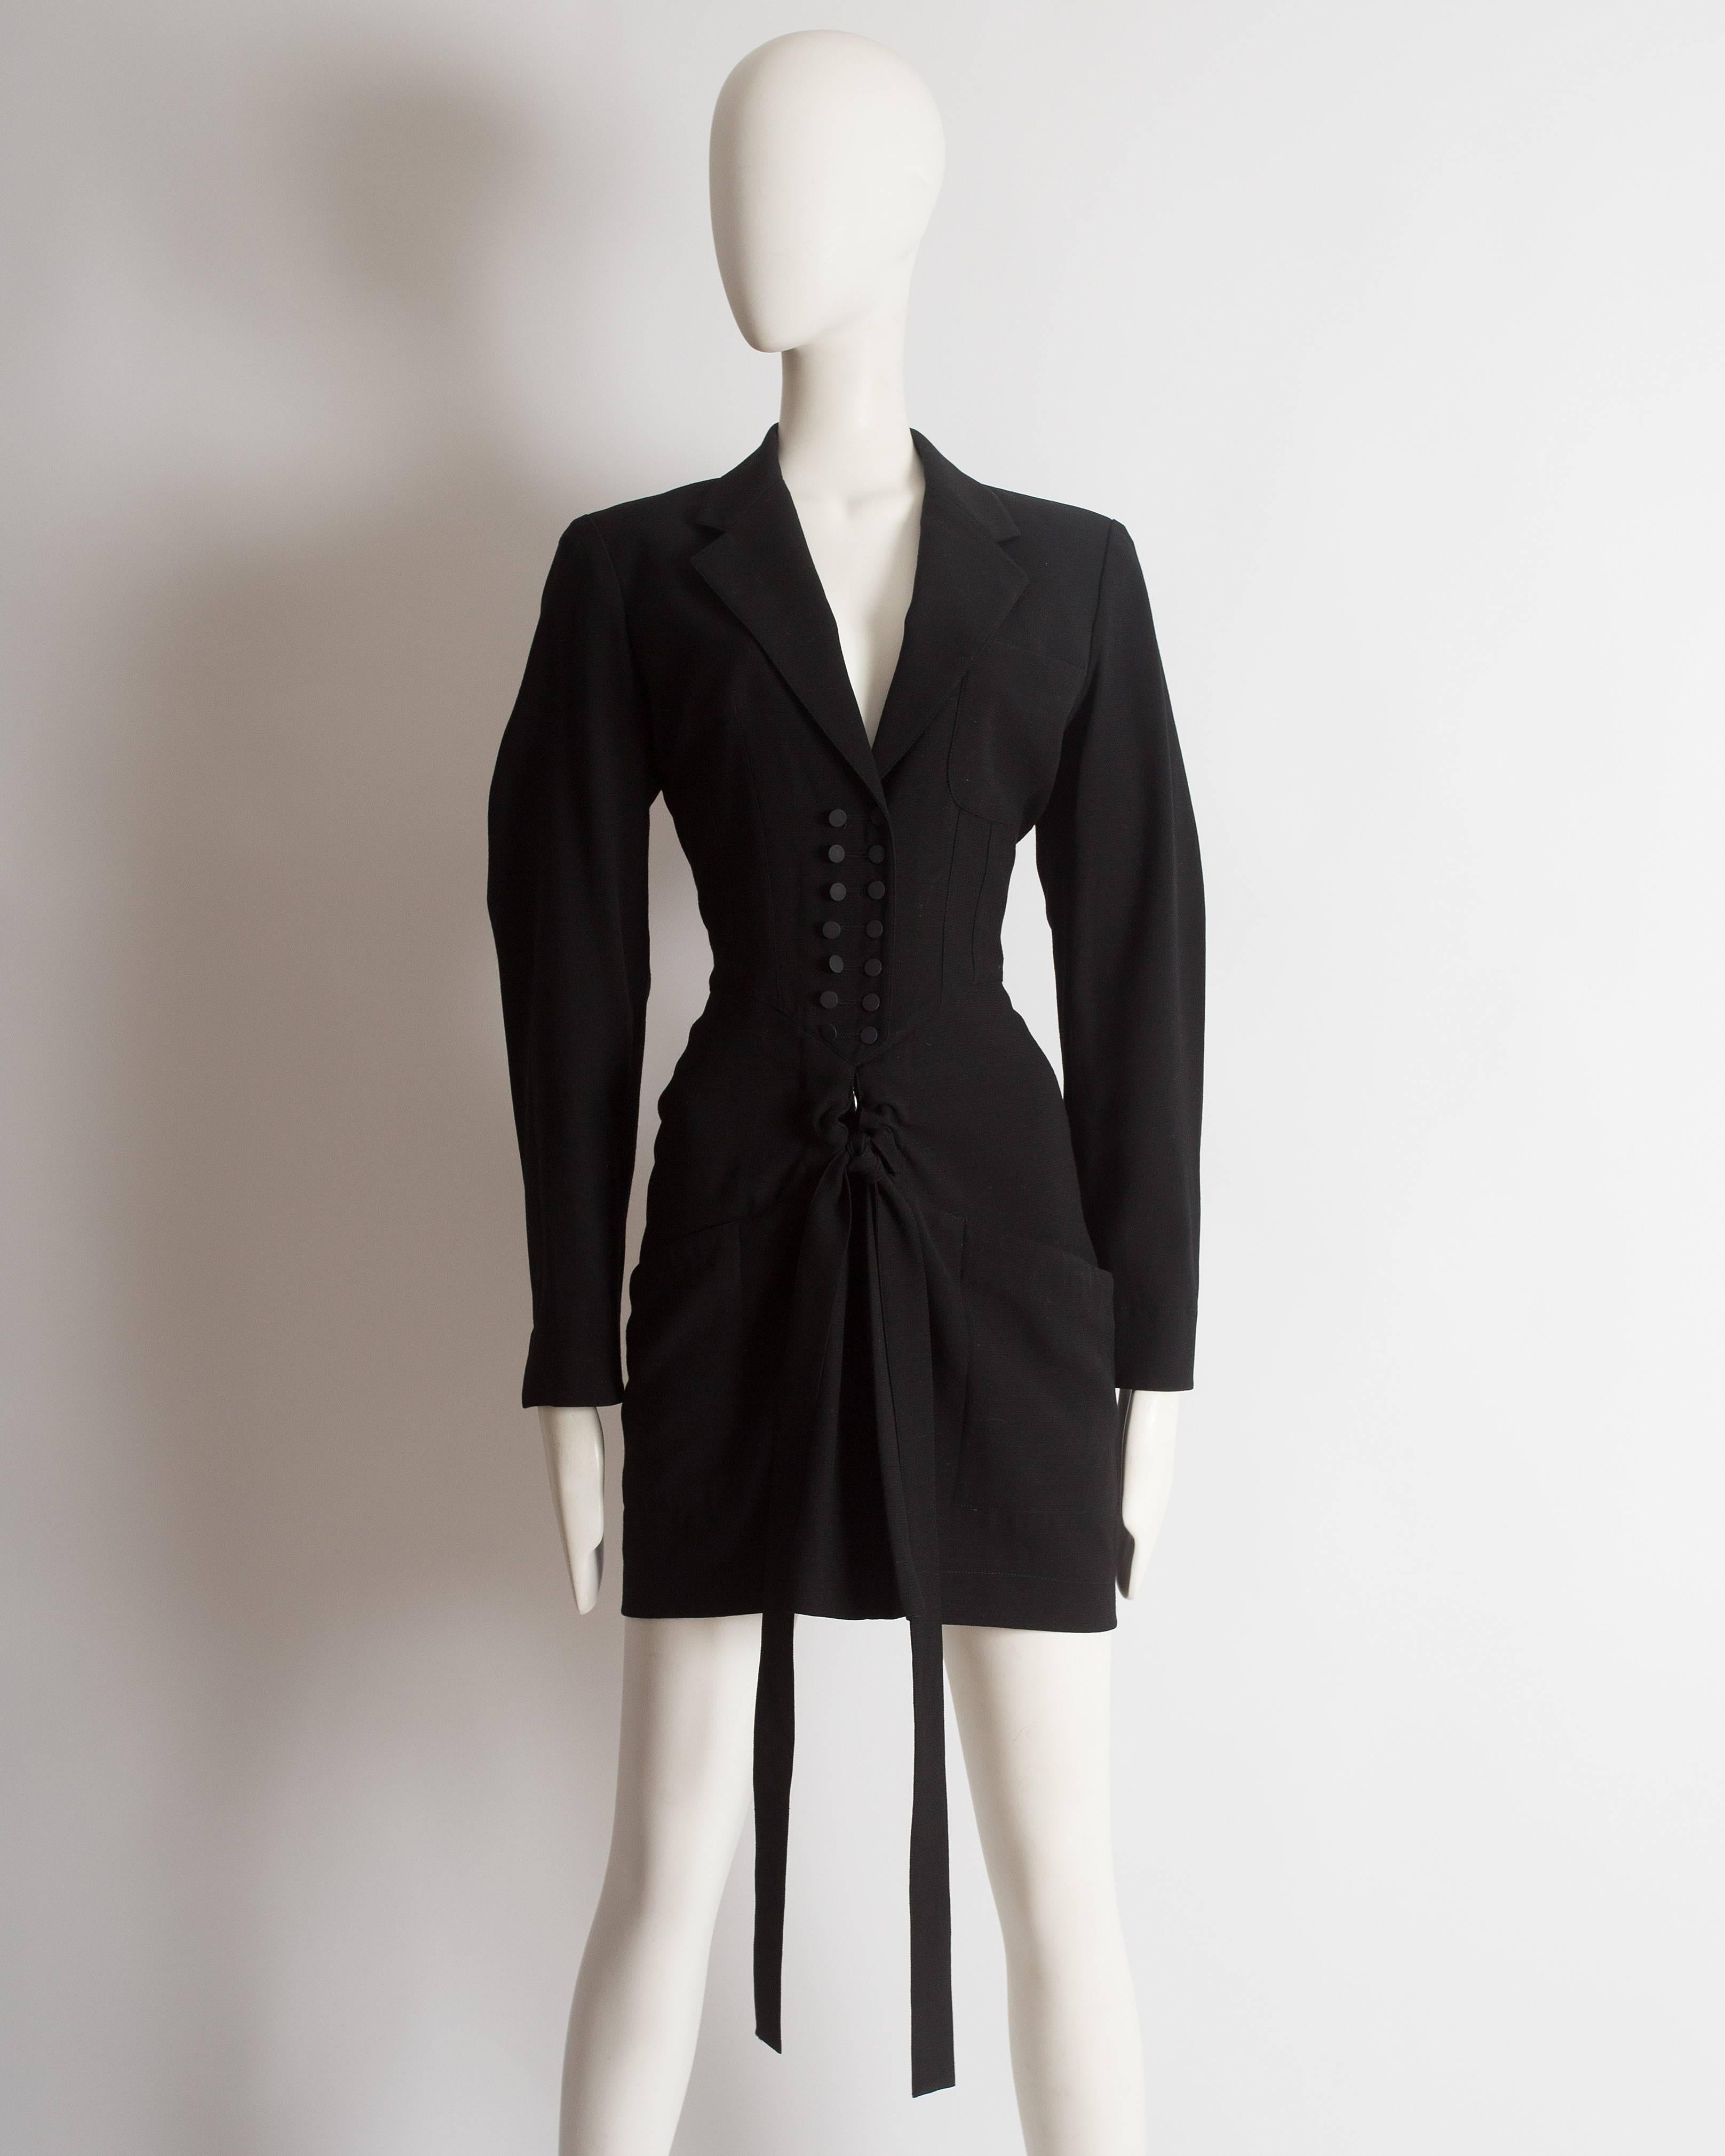 Rare Alaia black wool mini dress with a drawstring fastening, two front pockets, pointed collar and double button closures.

Autumn Winter 1988